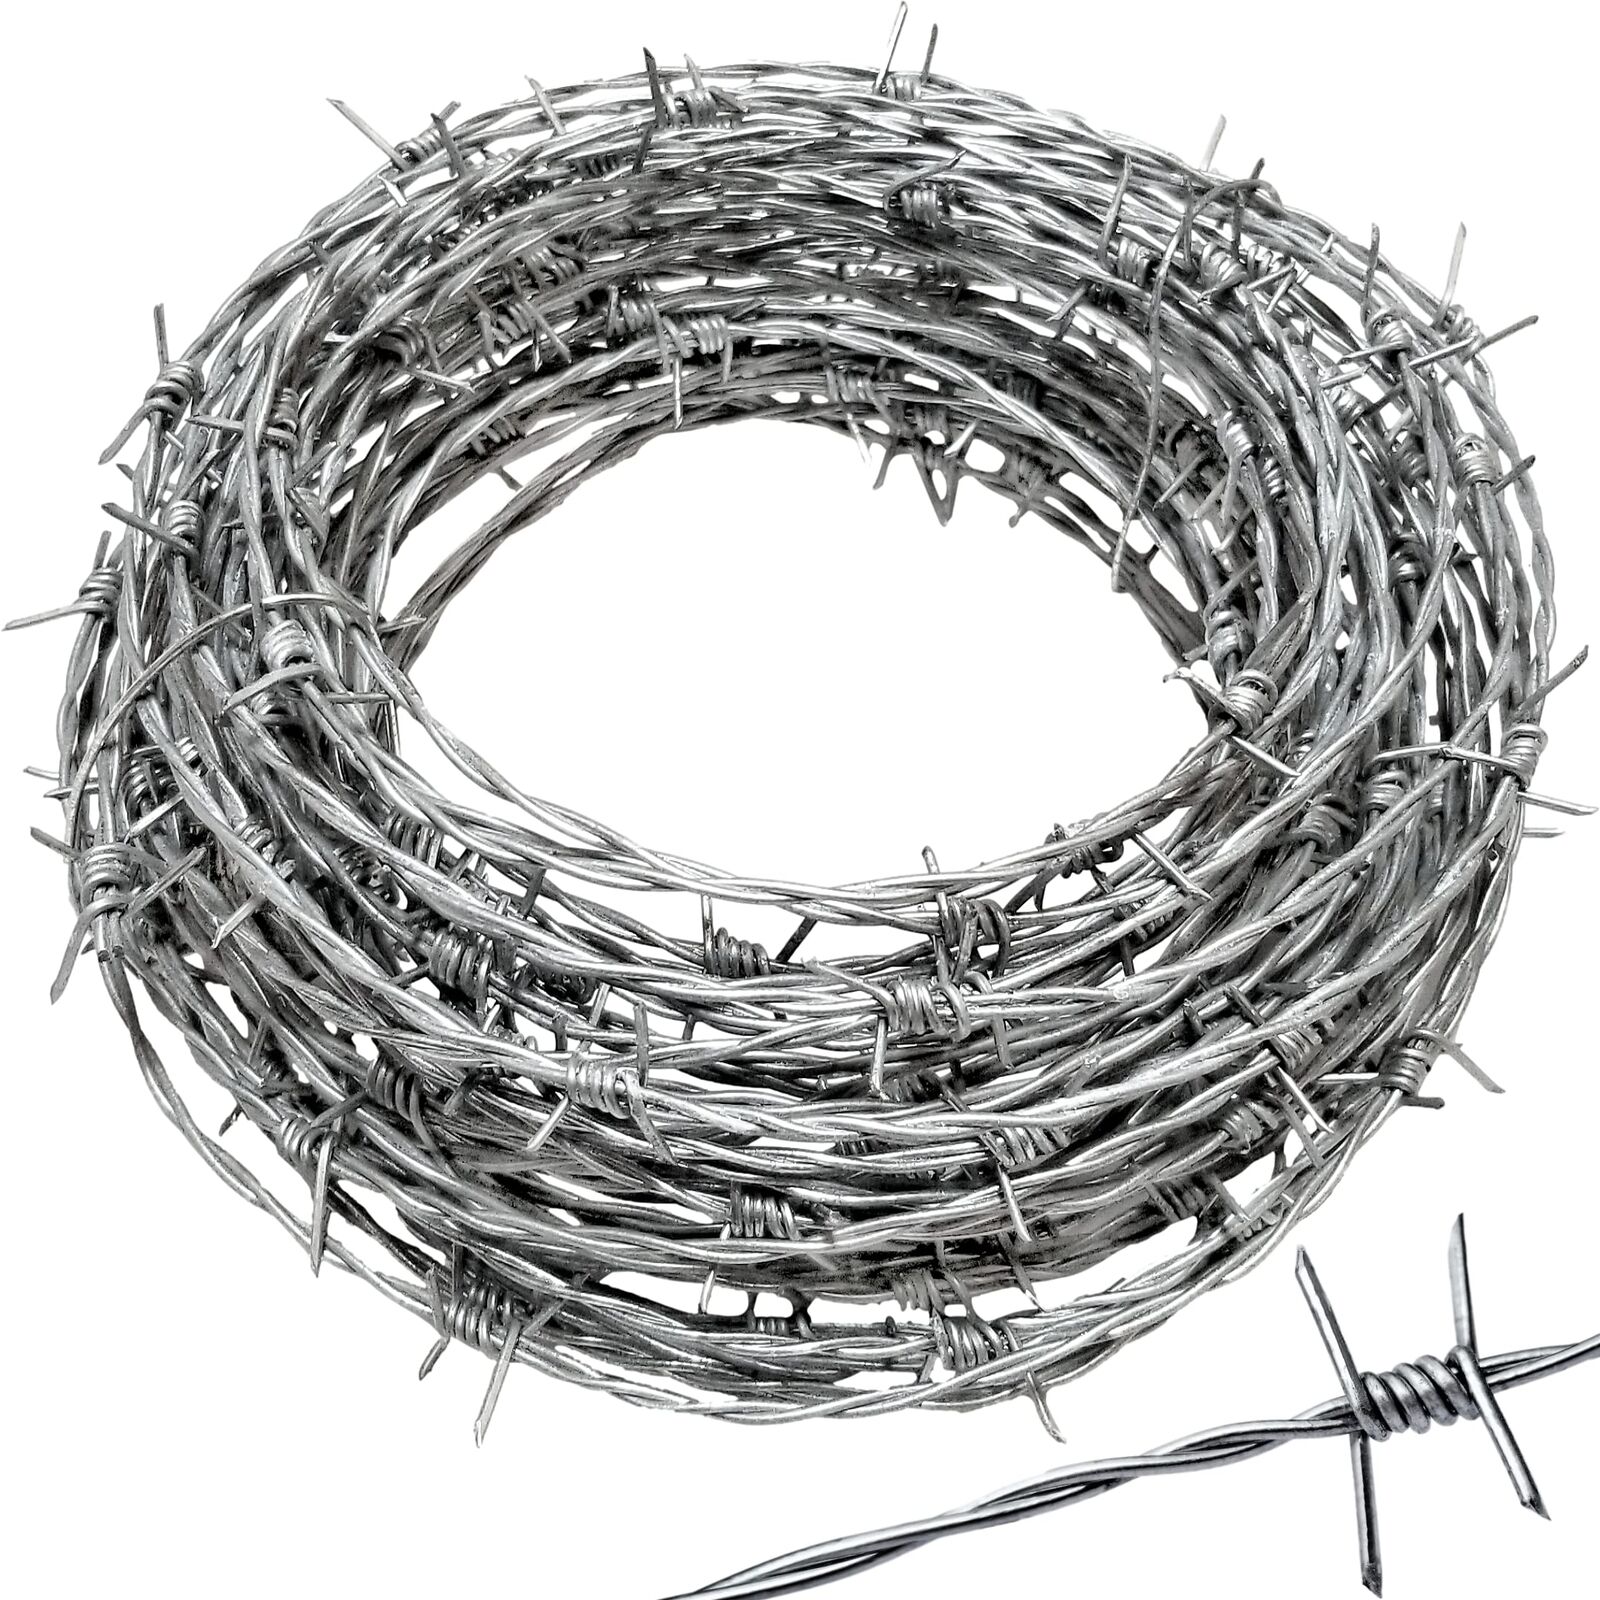 Real Barbed Wire 50ft 18 Gauge - Great for Crafts, Fences, and Critter Deterrent